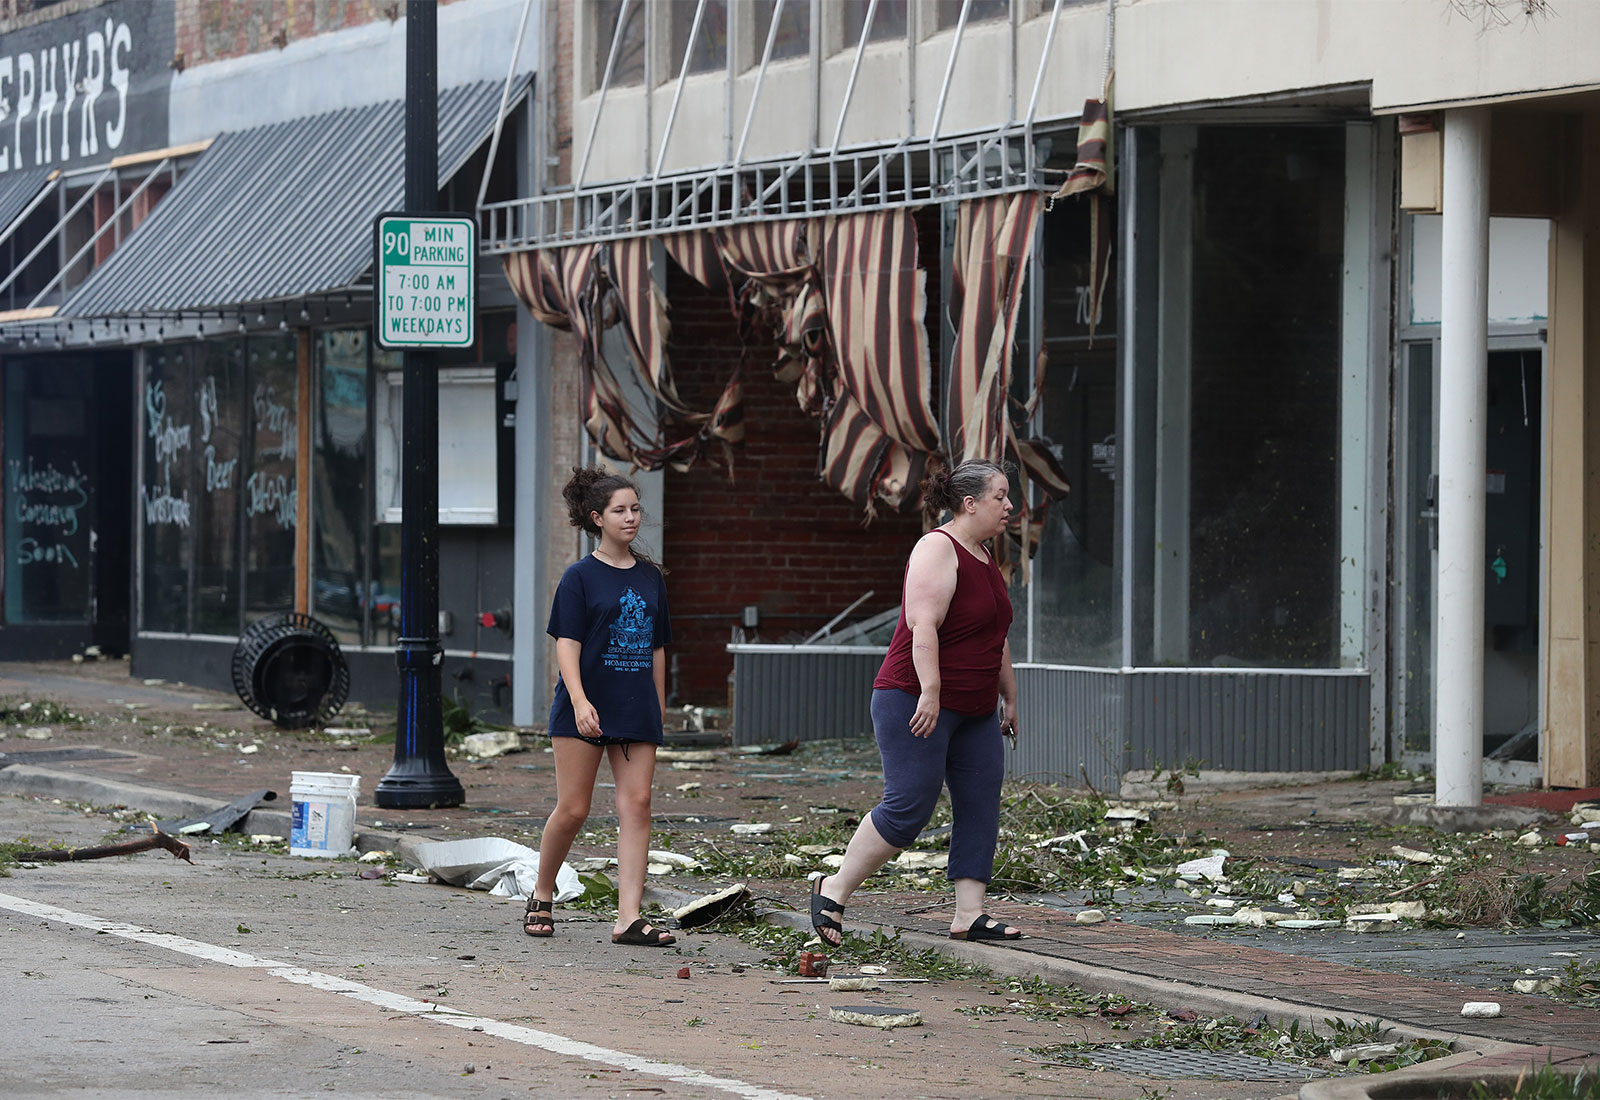 Two women walking on a street in a downtown area of Lake Charles, Louisiana; trash and debris litter the street and shopfronts have torn awnings and shattered windows